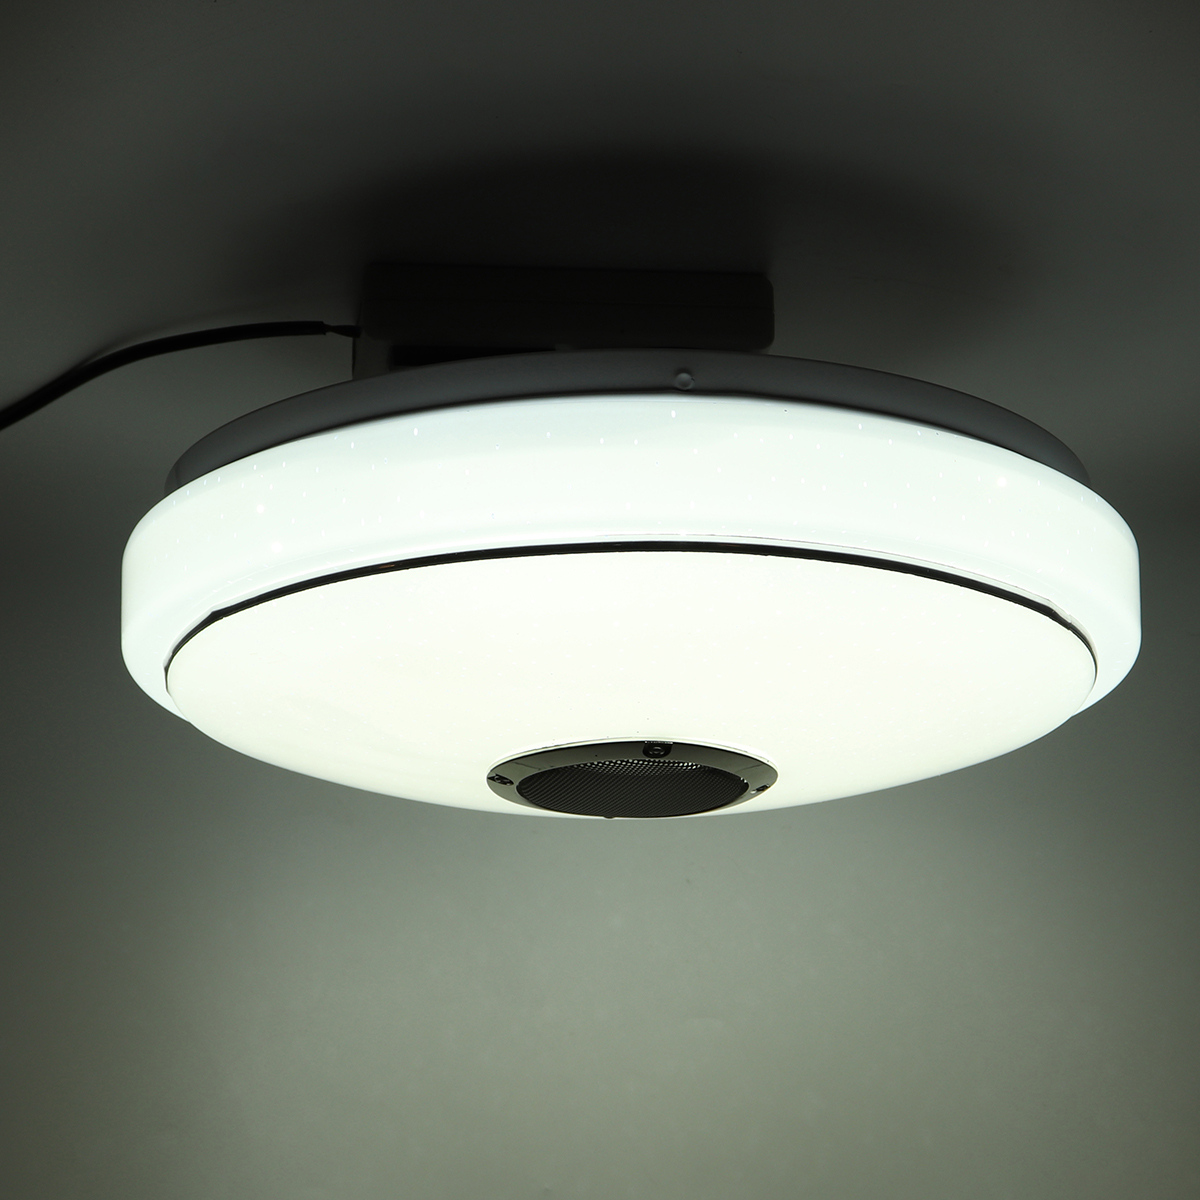 Dimmable-RGBW-LED-Music-Ceiling-Lights-with-bluetooth-Speaker-Cellphone-APP-Control-Color-Changing-L-1742404-11